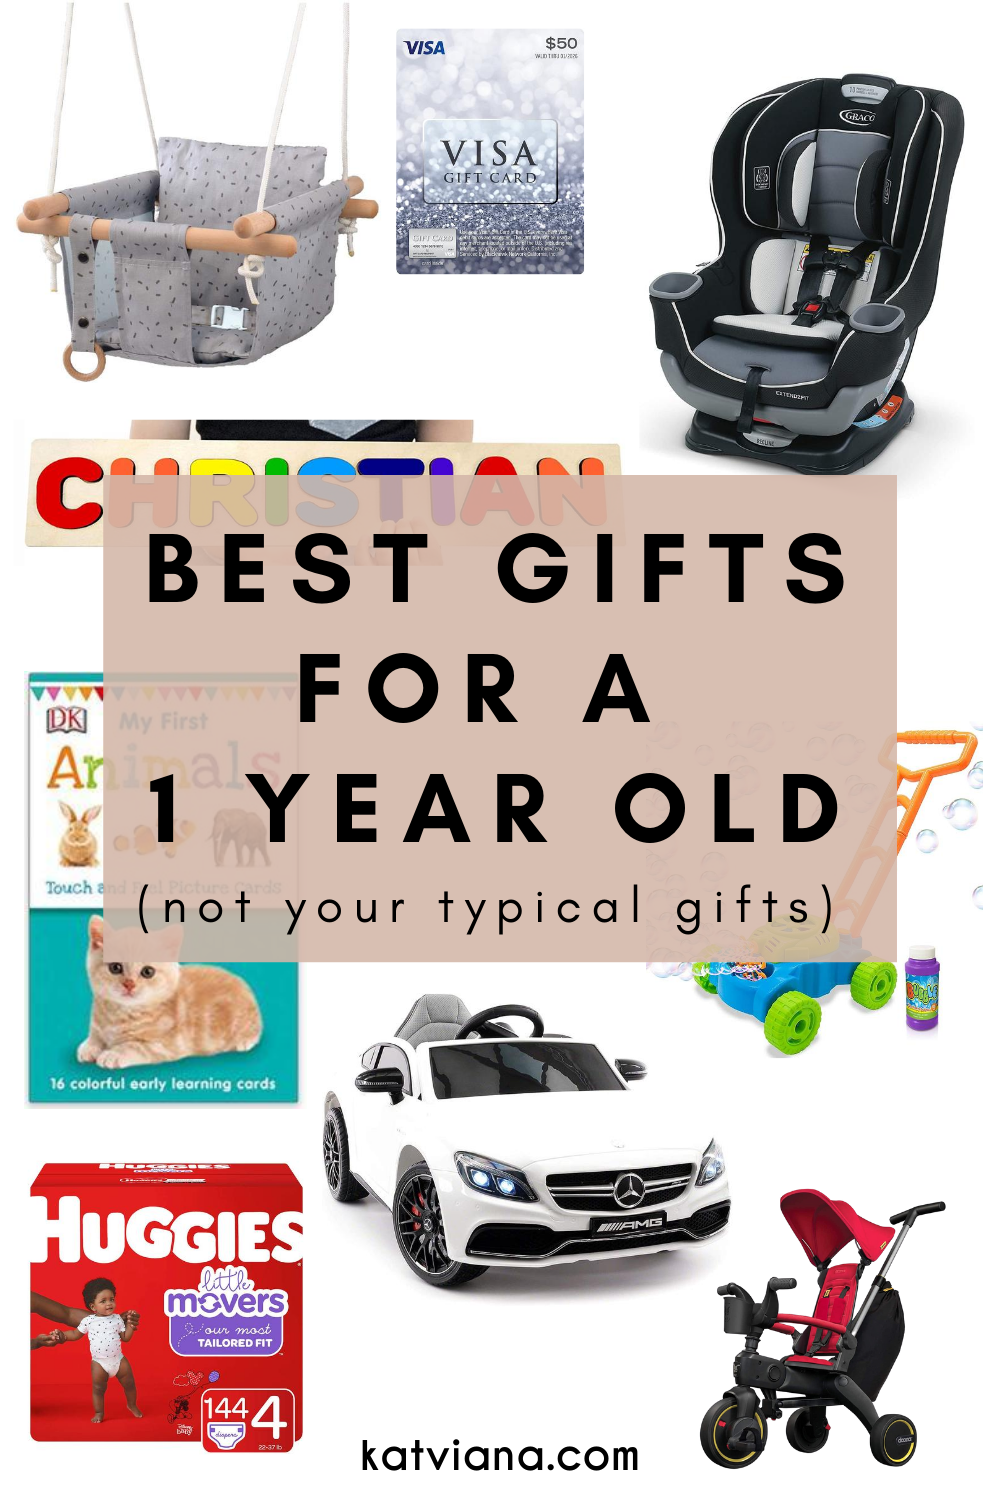 Best Gifts For A 1 Year Old | Kat Viana